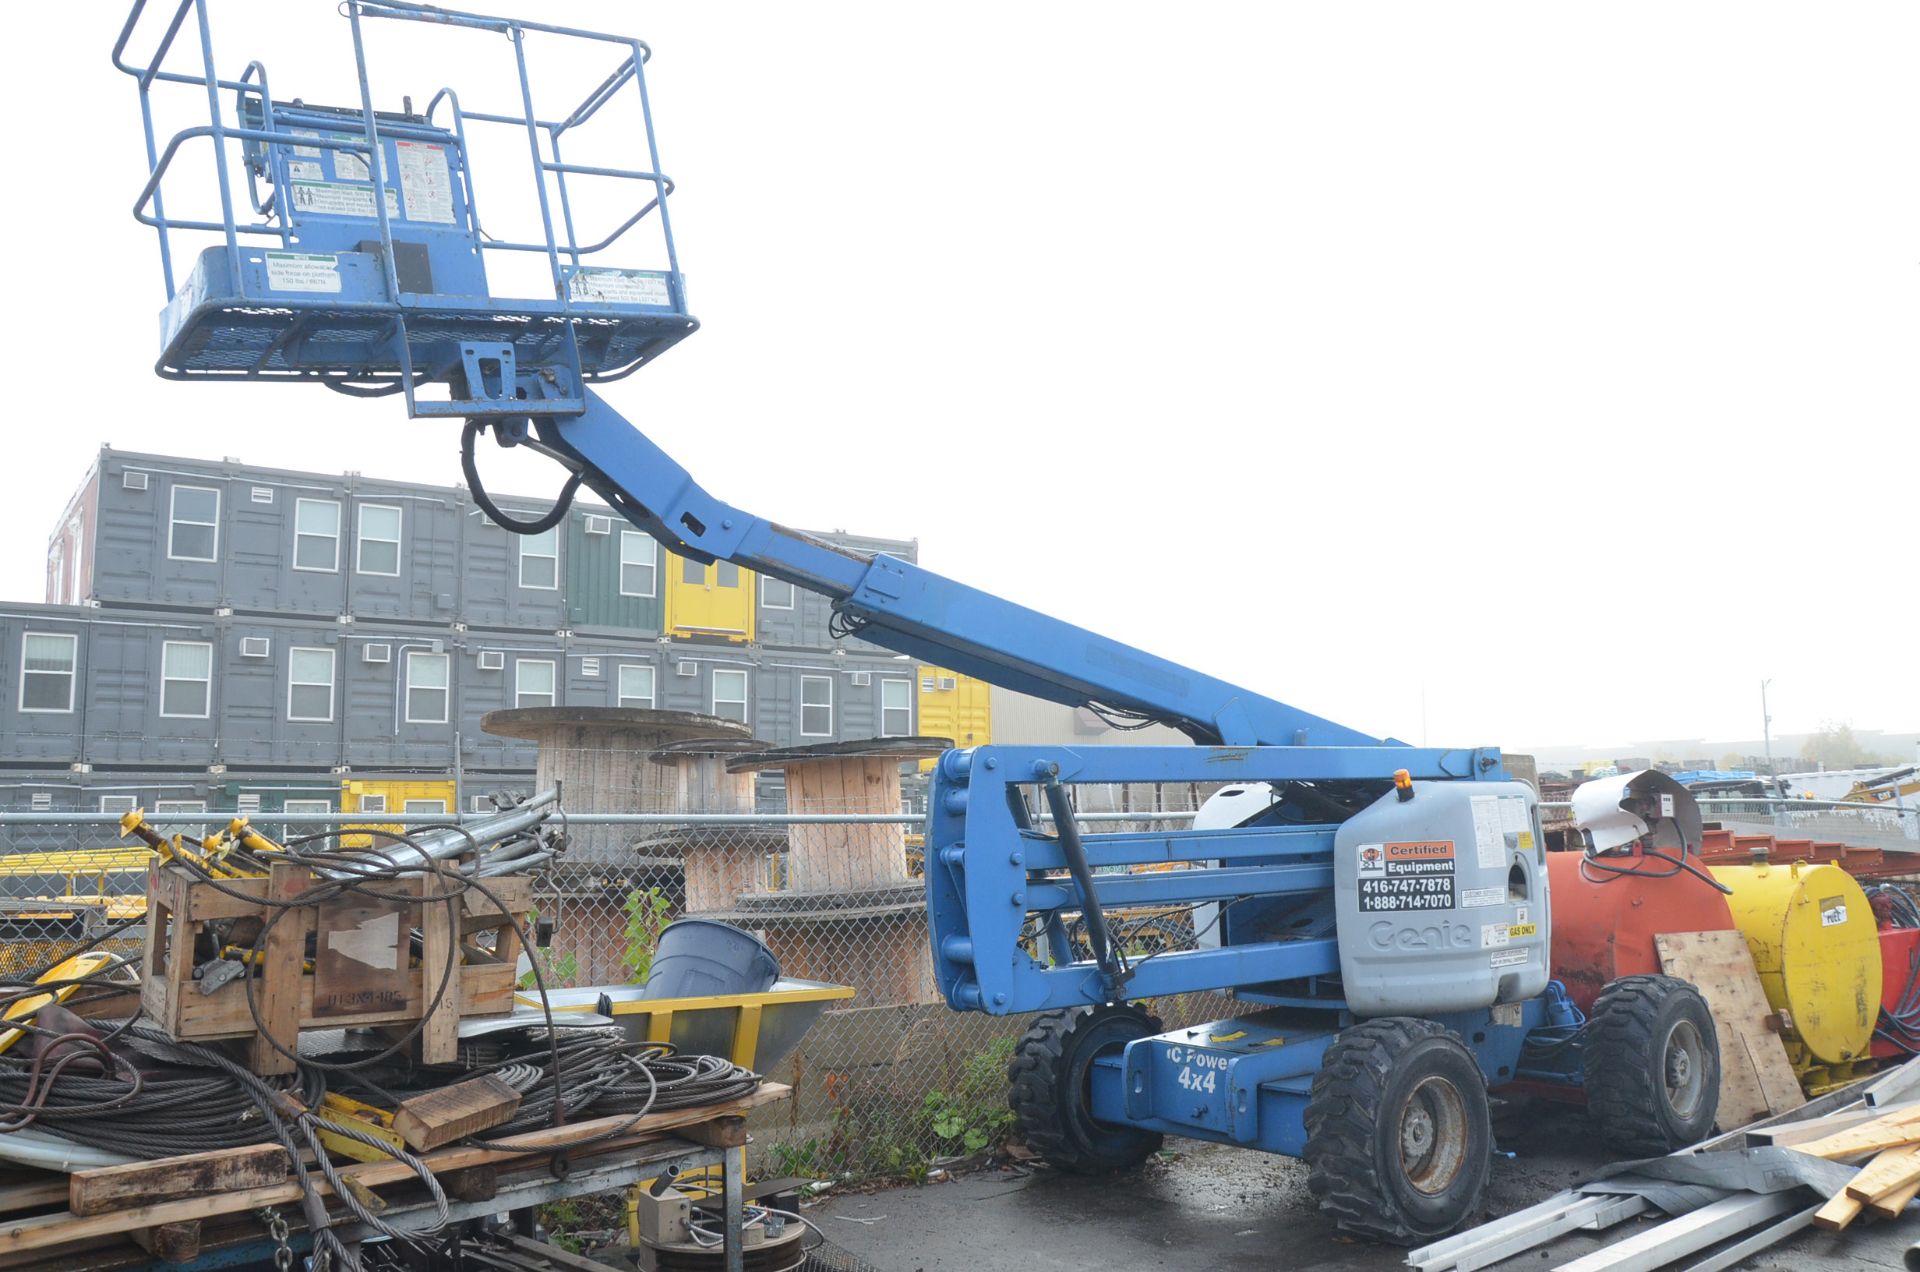 GENIE (2002) Z-45/25 LPG/GAS BOOM LIFT WITH 500 LBS CAPACITY, 45' MAX VERTICAL REACH, 4X4, LEVELLING - Image 2 of 7